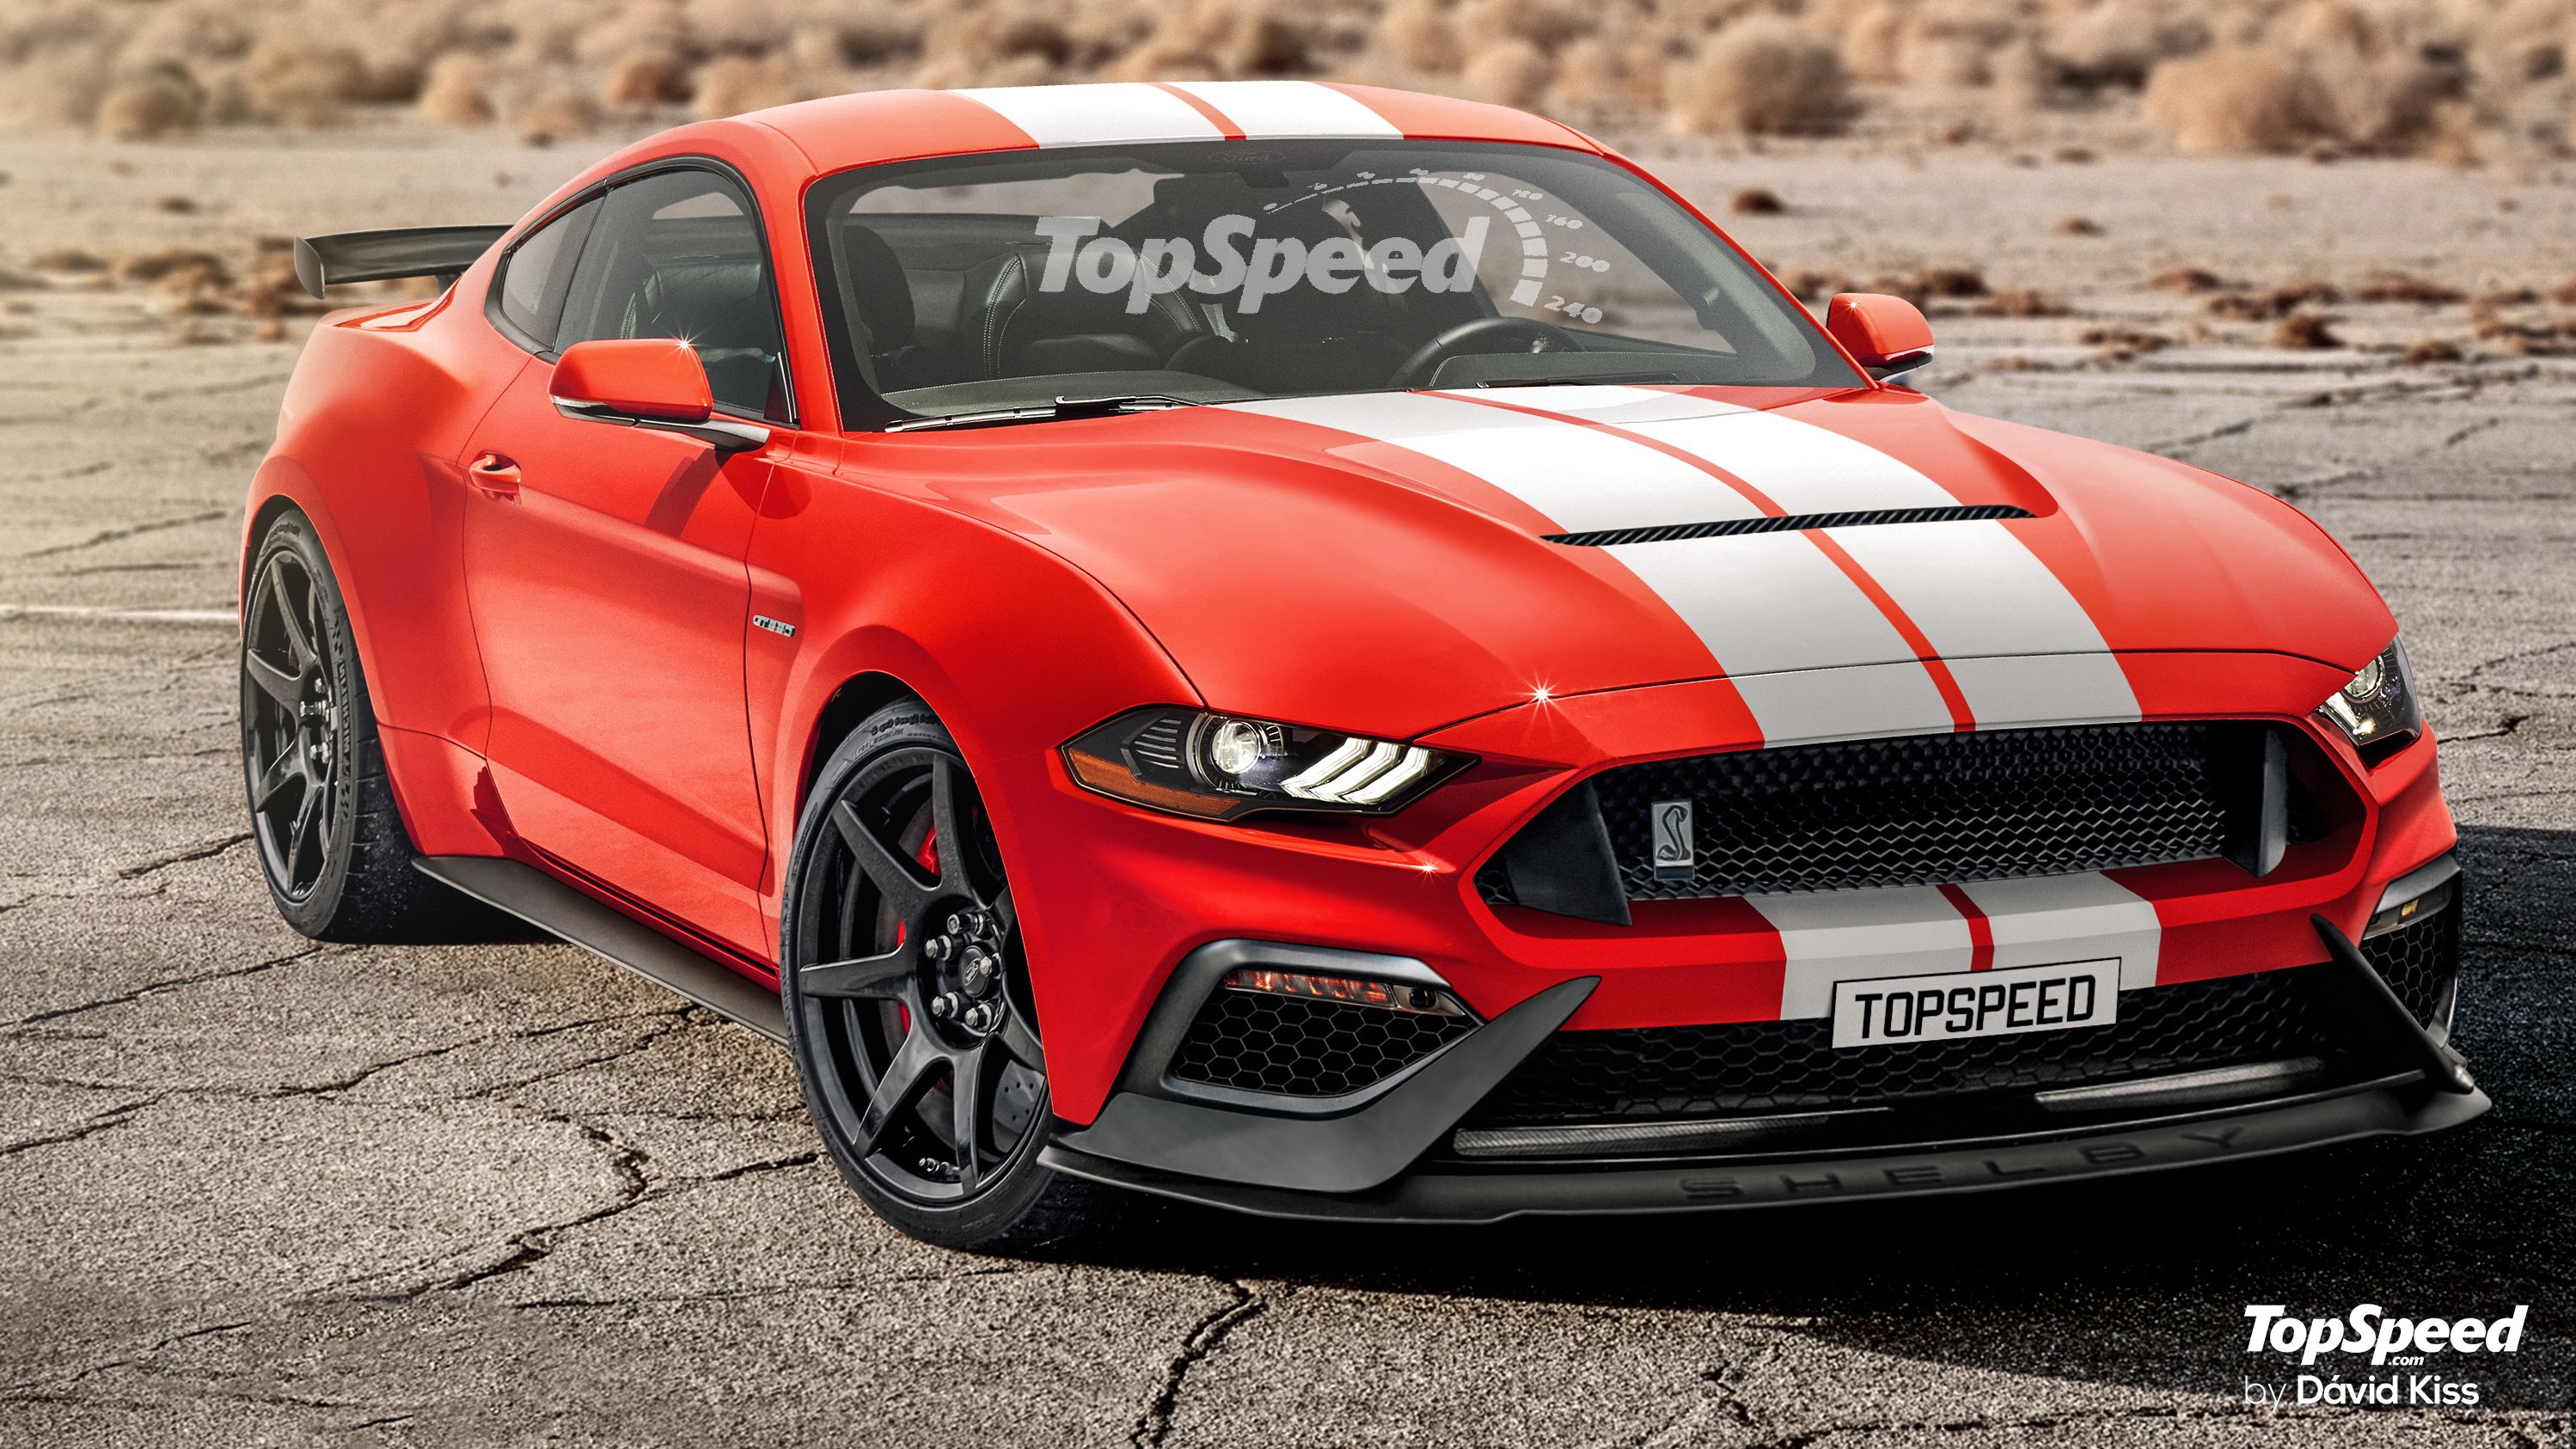 2017 Do These Leaked Images Prove a New Shelby GT500 Mustang is on the Way?